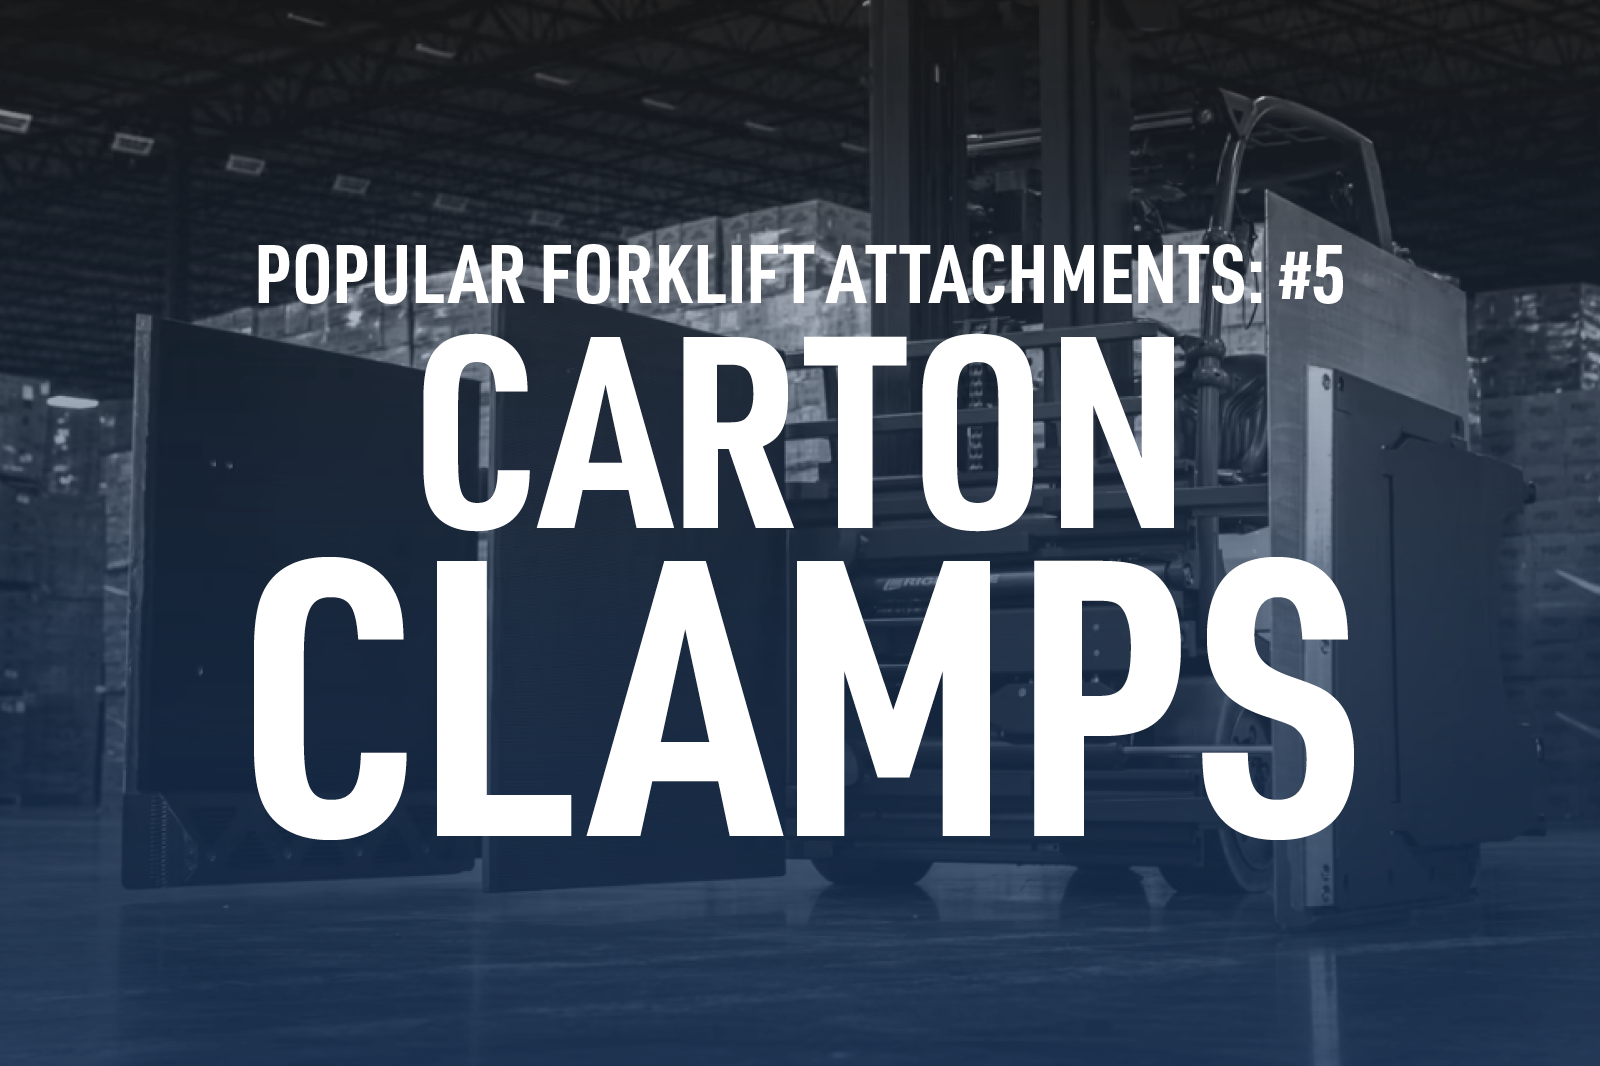 Popular Forklift Attachments #5 Carton Clamps